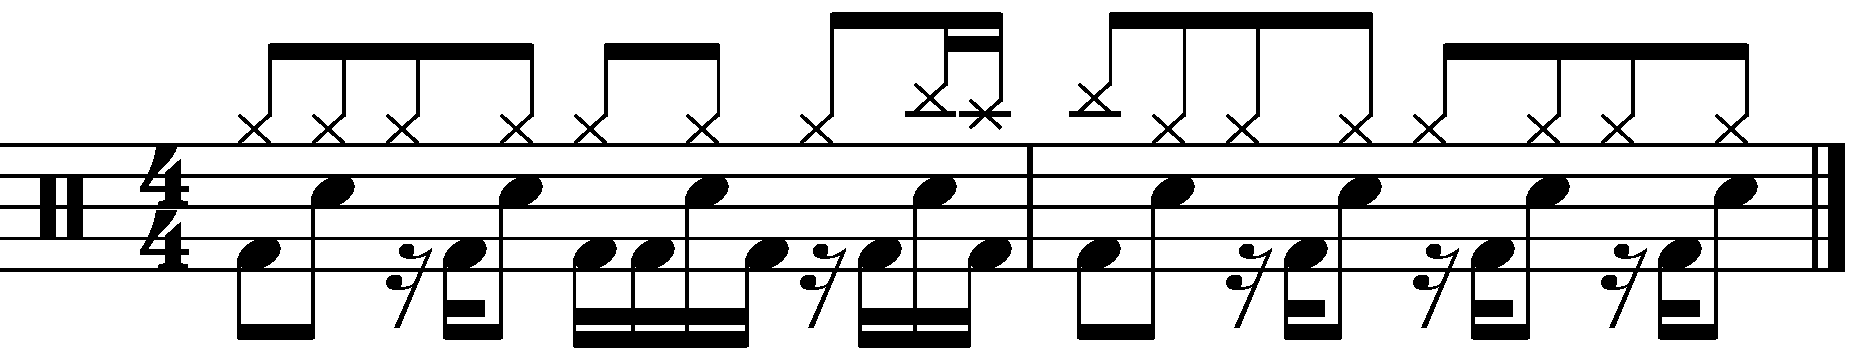 The concept applied to a double time groove